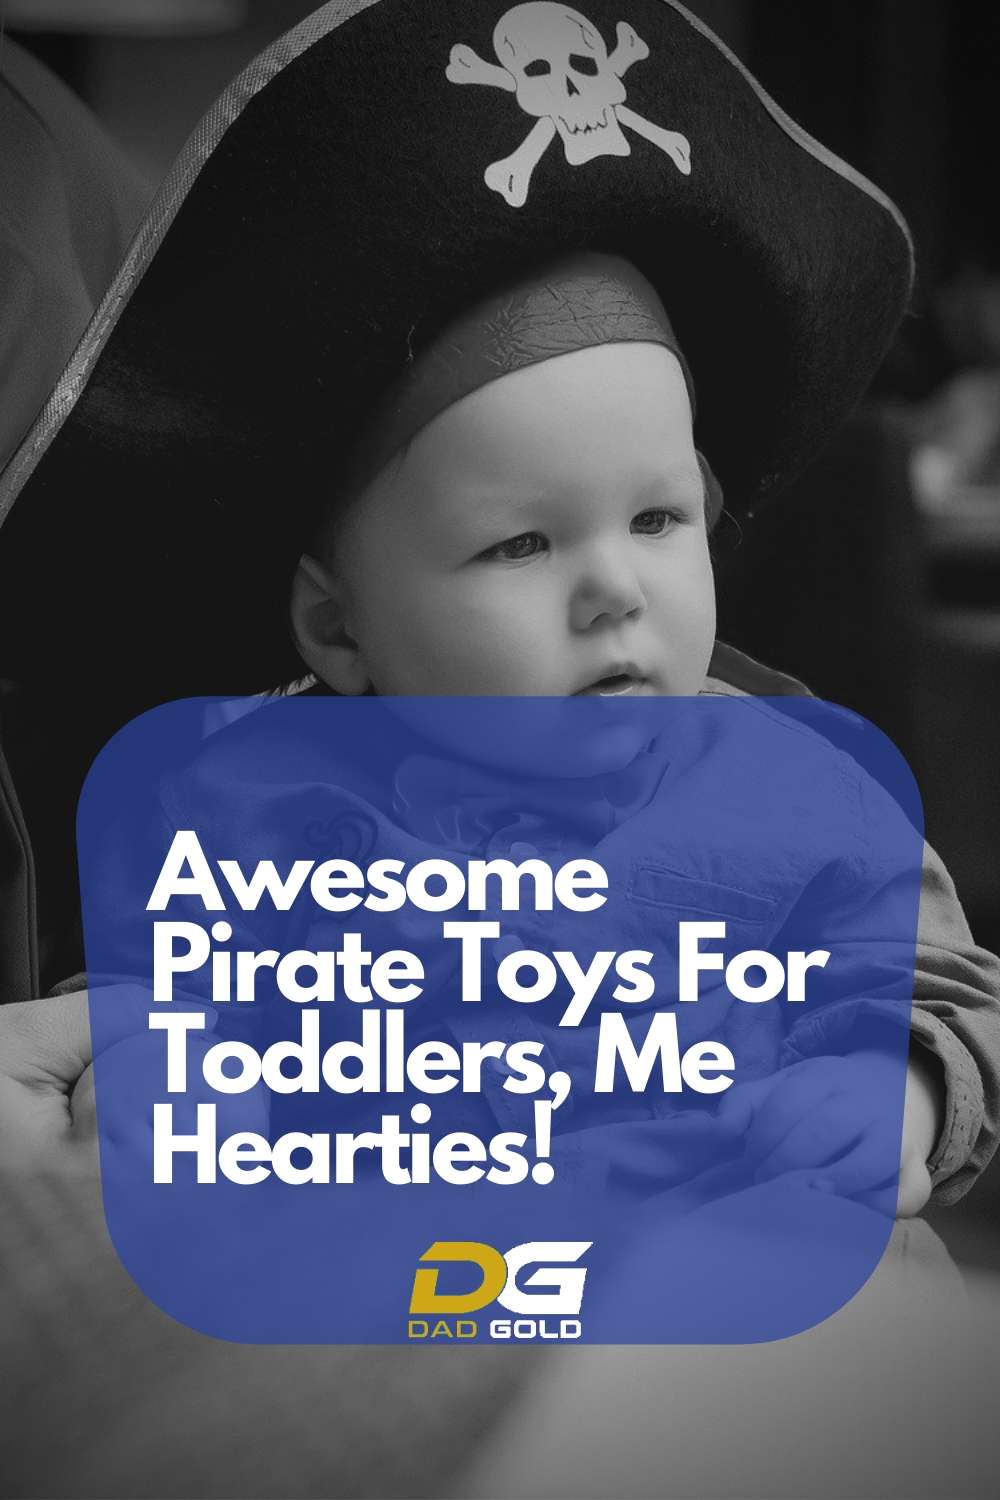 Best Pirate Toys For Toddlers, Me Hearties!